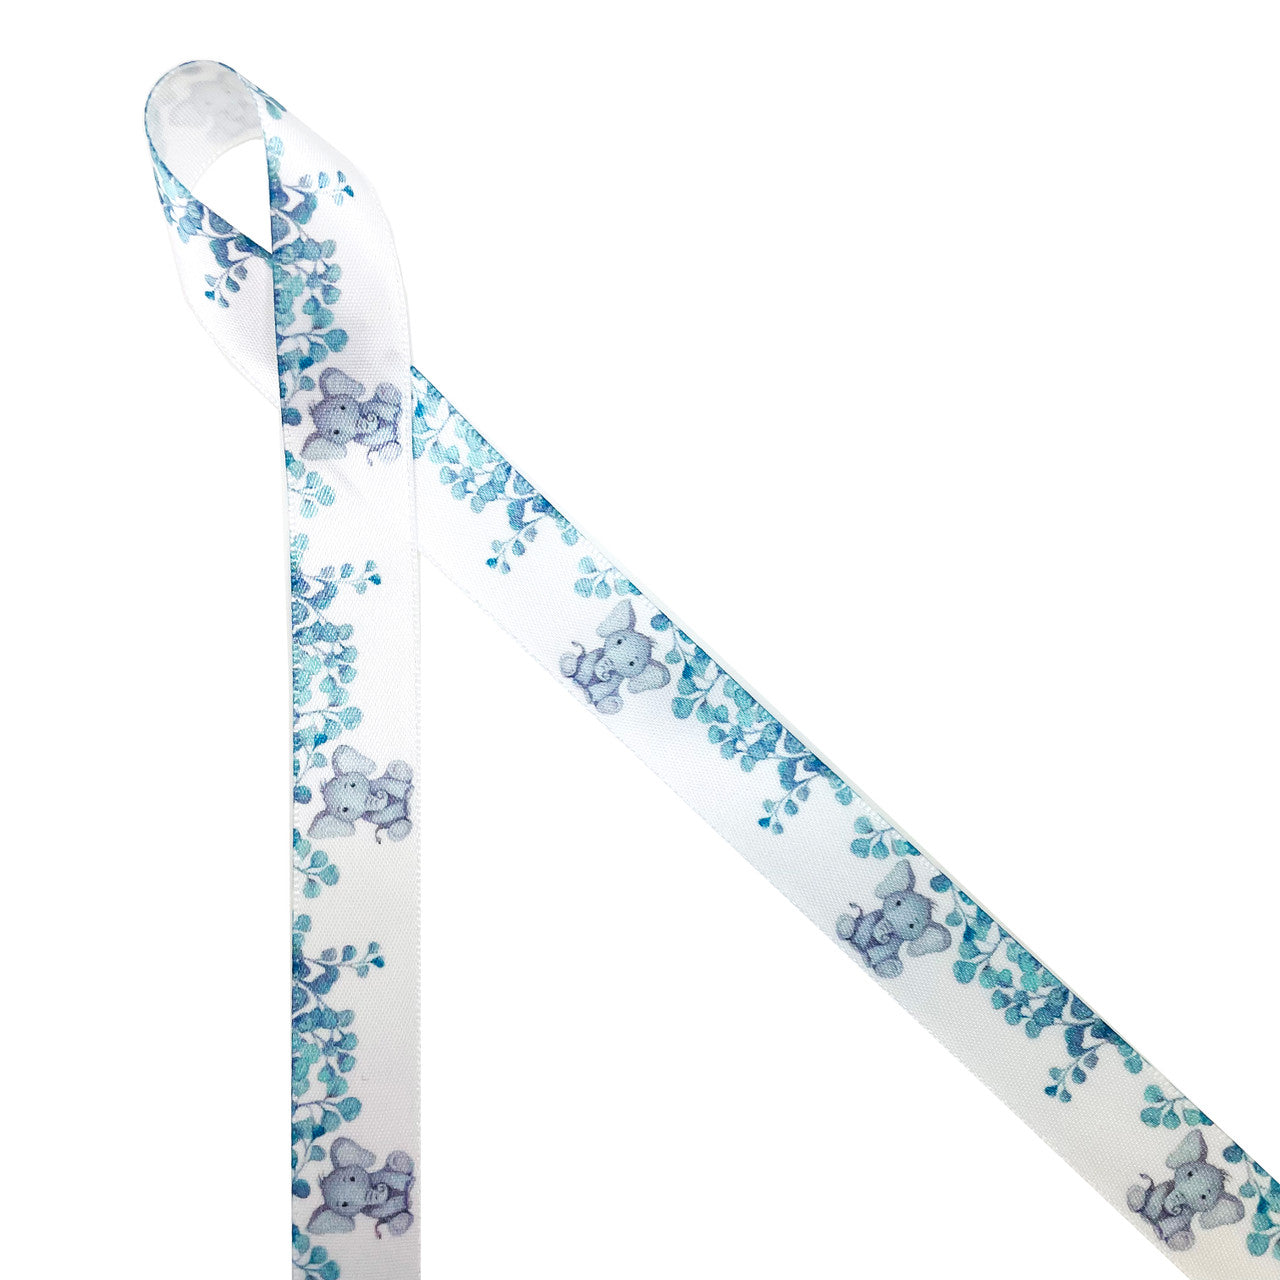 Baby Elephant ribbon with eucalyptus leaves printed on  5/8" and 1.5" white satin